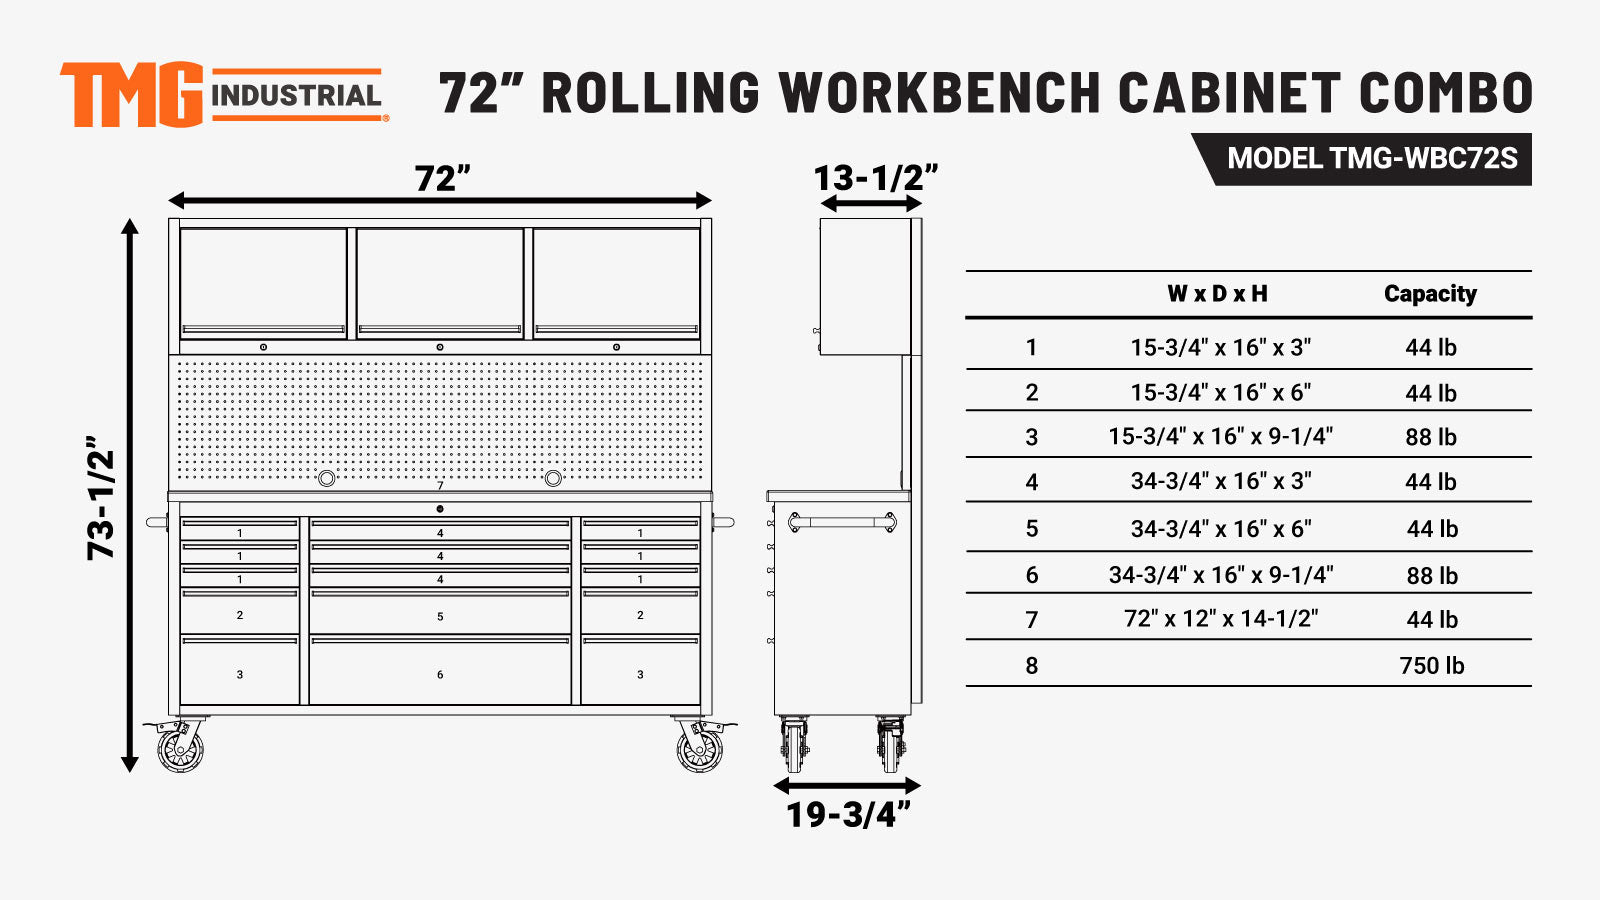 TMG Industrial Stainless Steel 72” Rolling Workbench Cabinet Combo, 15 Lockable Drawers, Wall-Mounted Cabinets, Pegboard, Adjustable Shelving, TMG-WBC72S-specifications-image